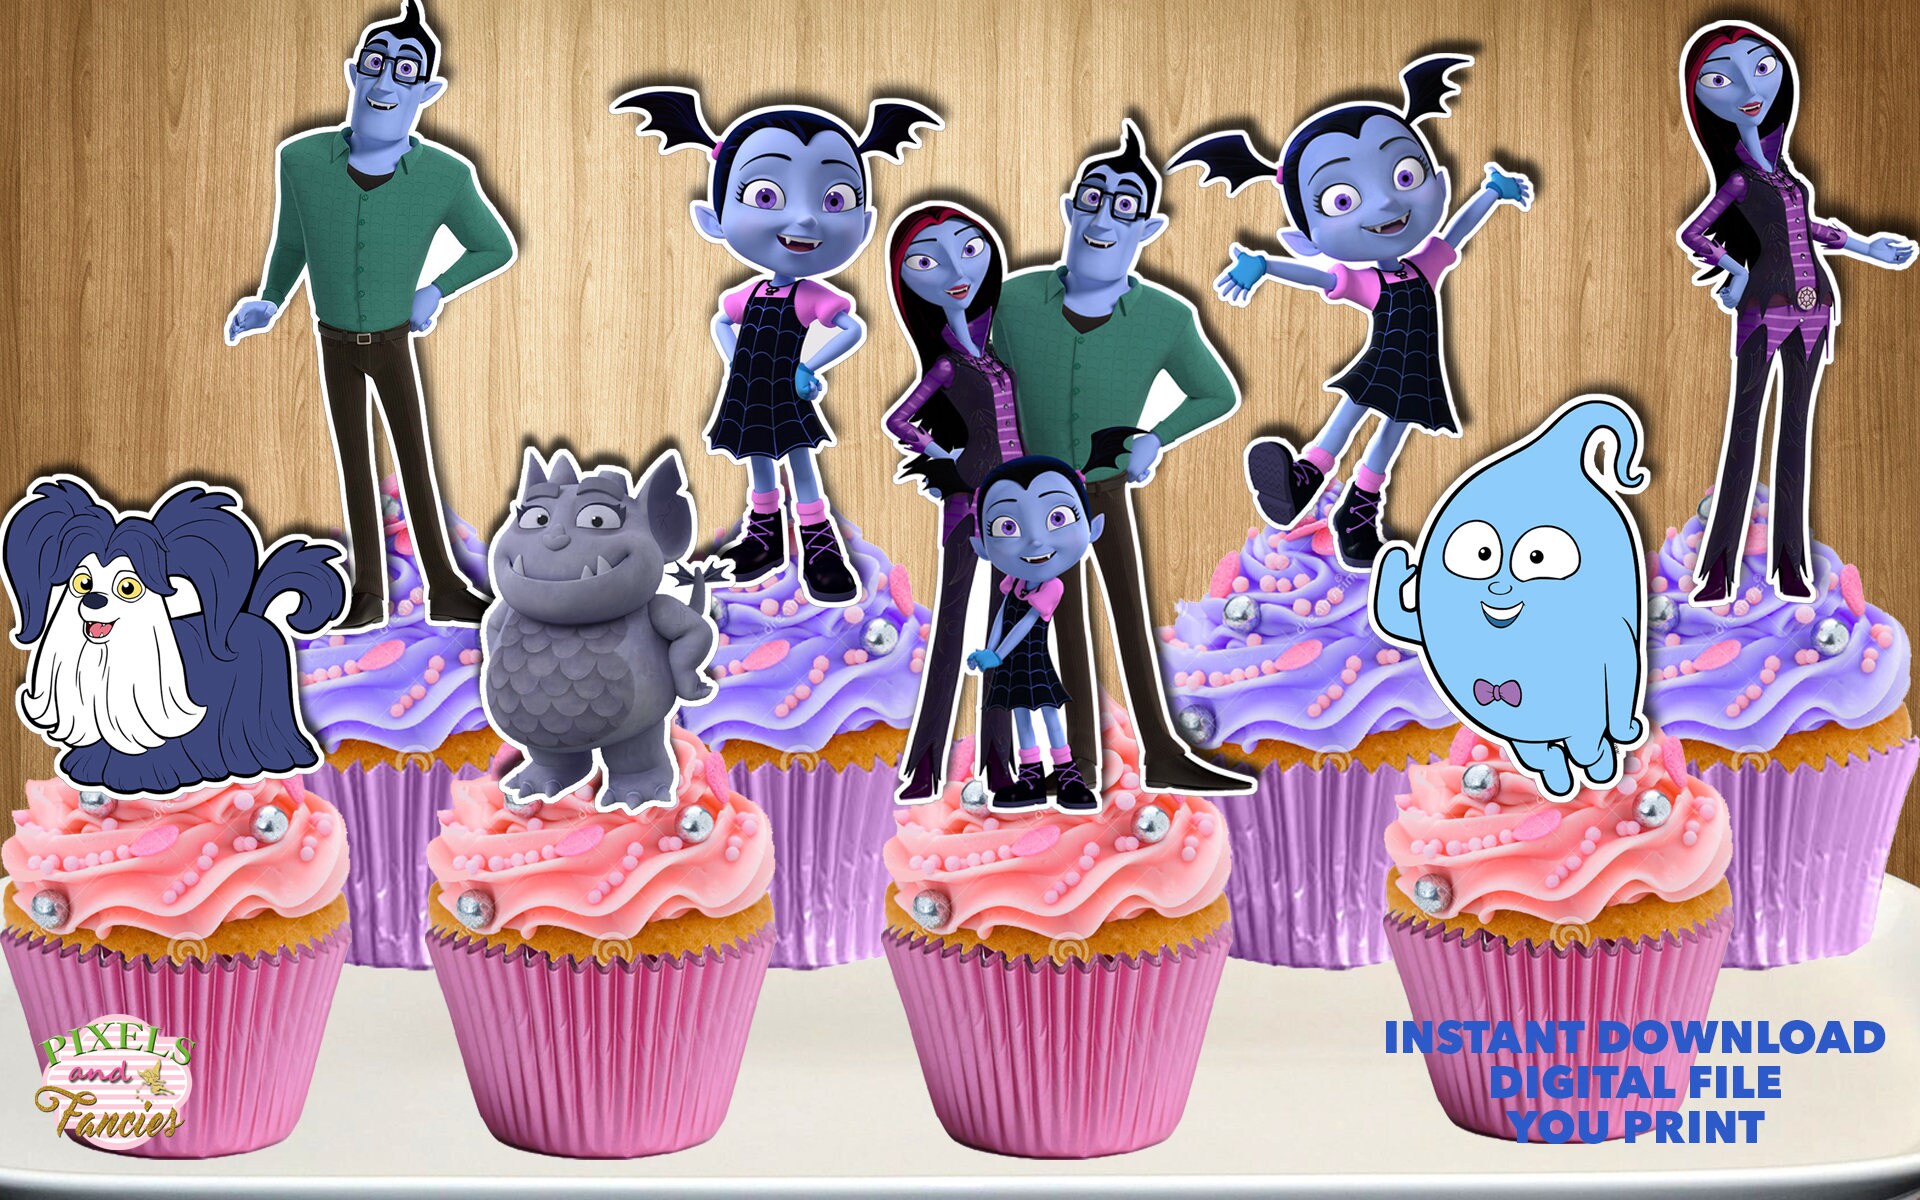 Vampirina Inspiré 15 x 2" Round CUPCAKE TOPPERS comestibles givrage/plaquette